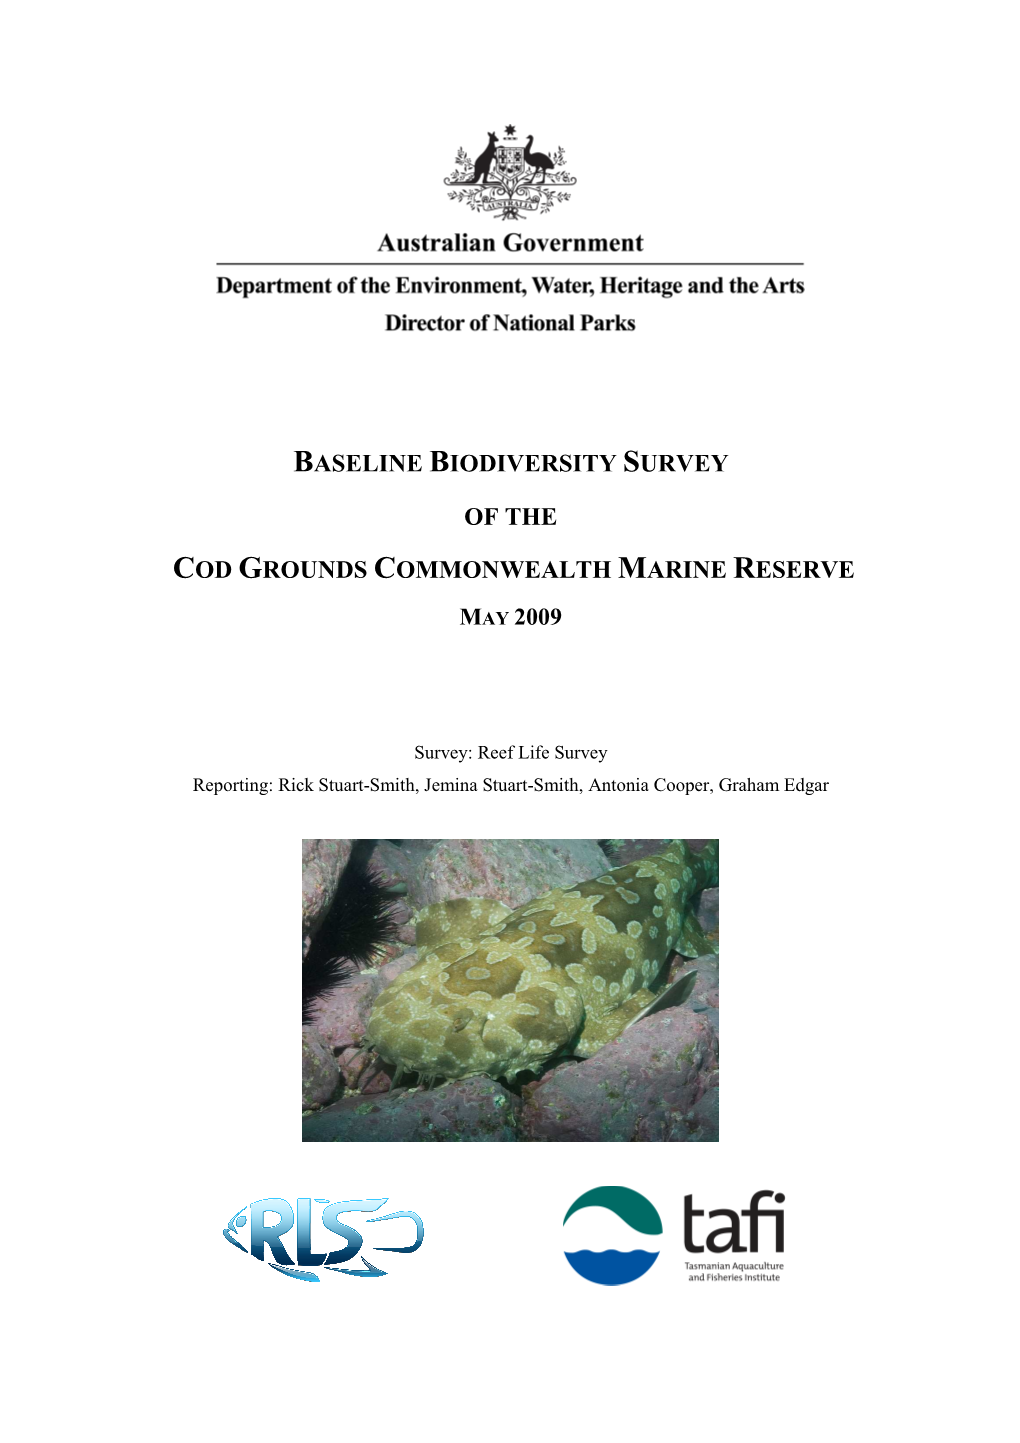 Baseline Biodiversity Survey of the Cod Grounds Commonwealth